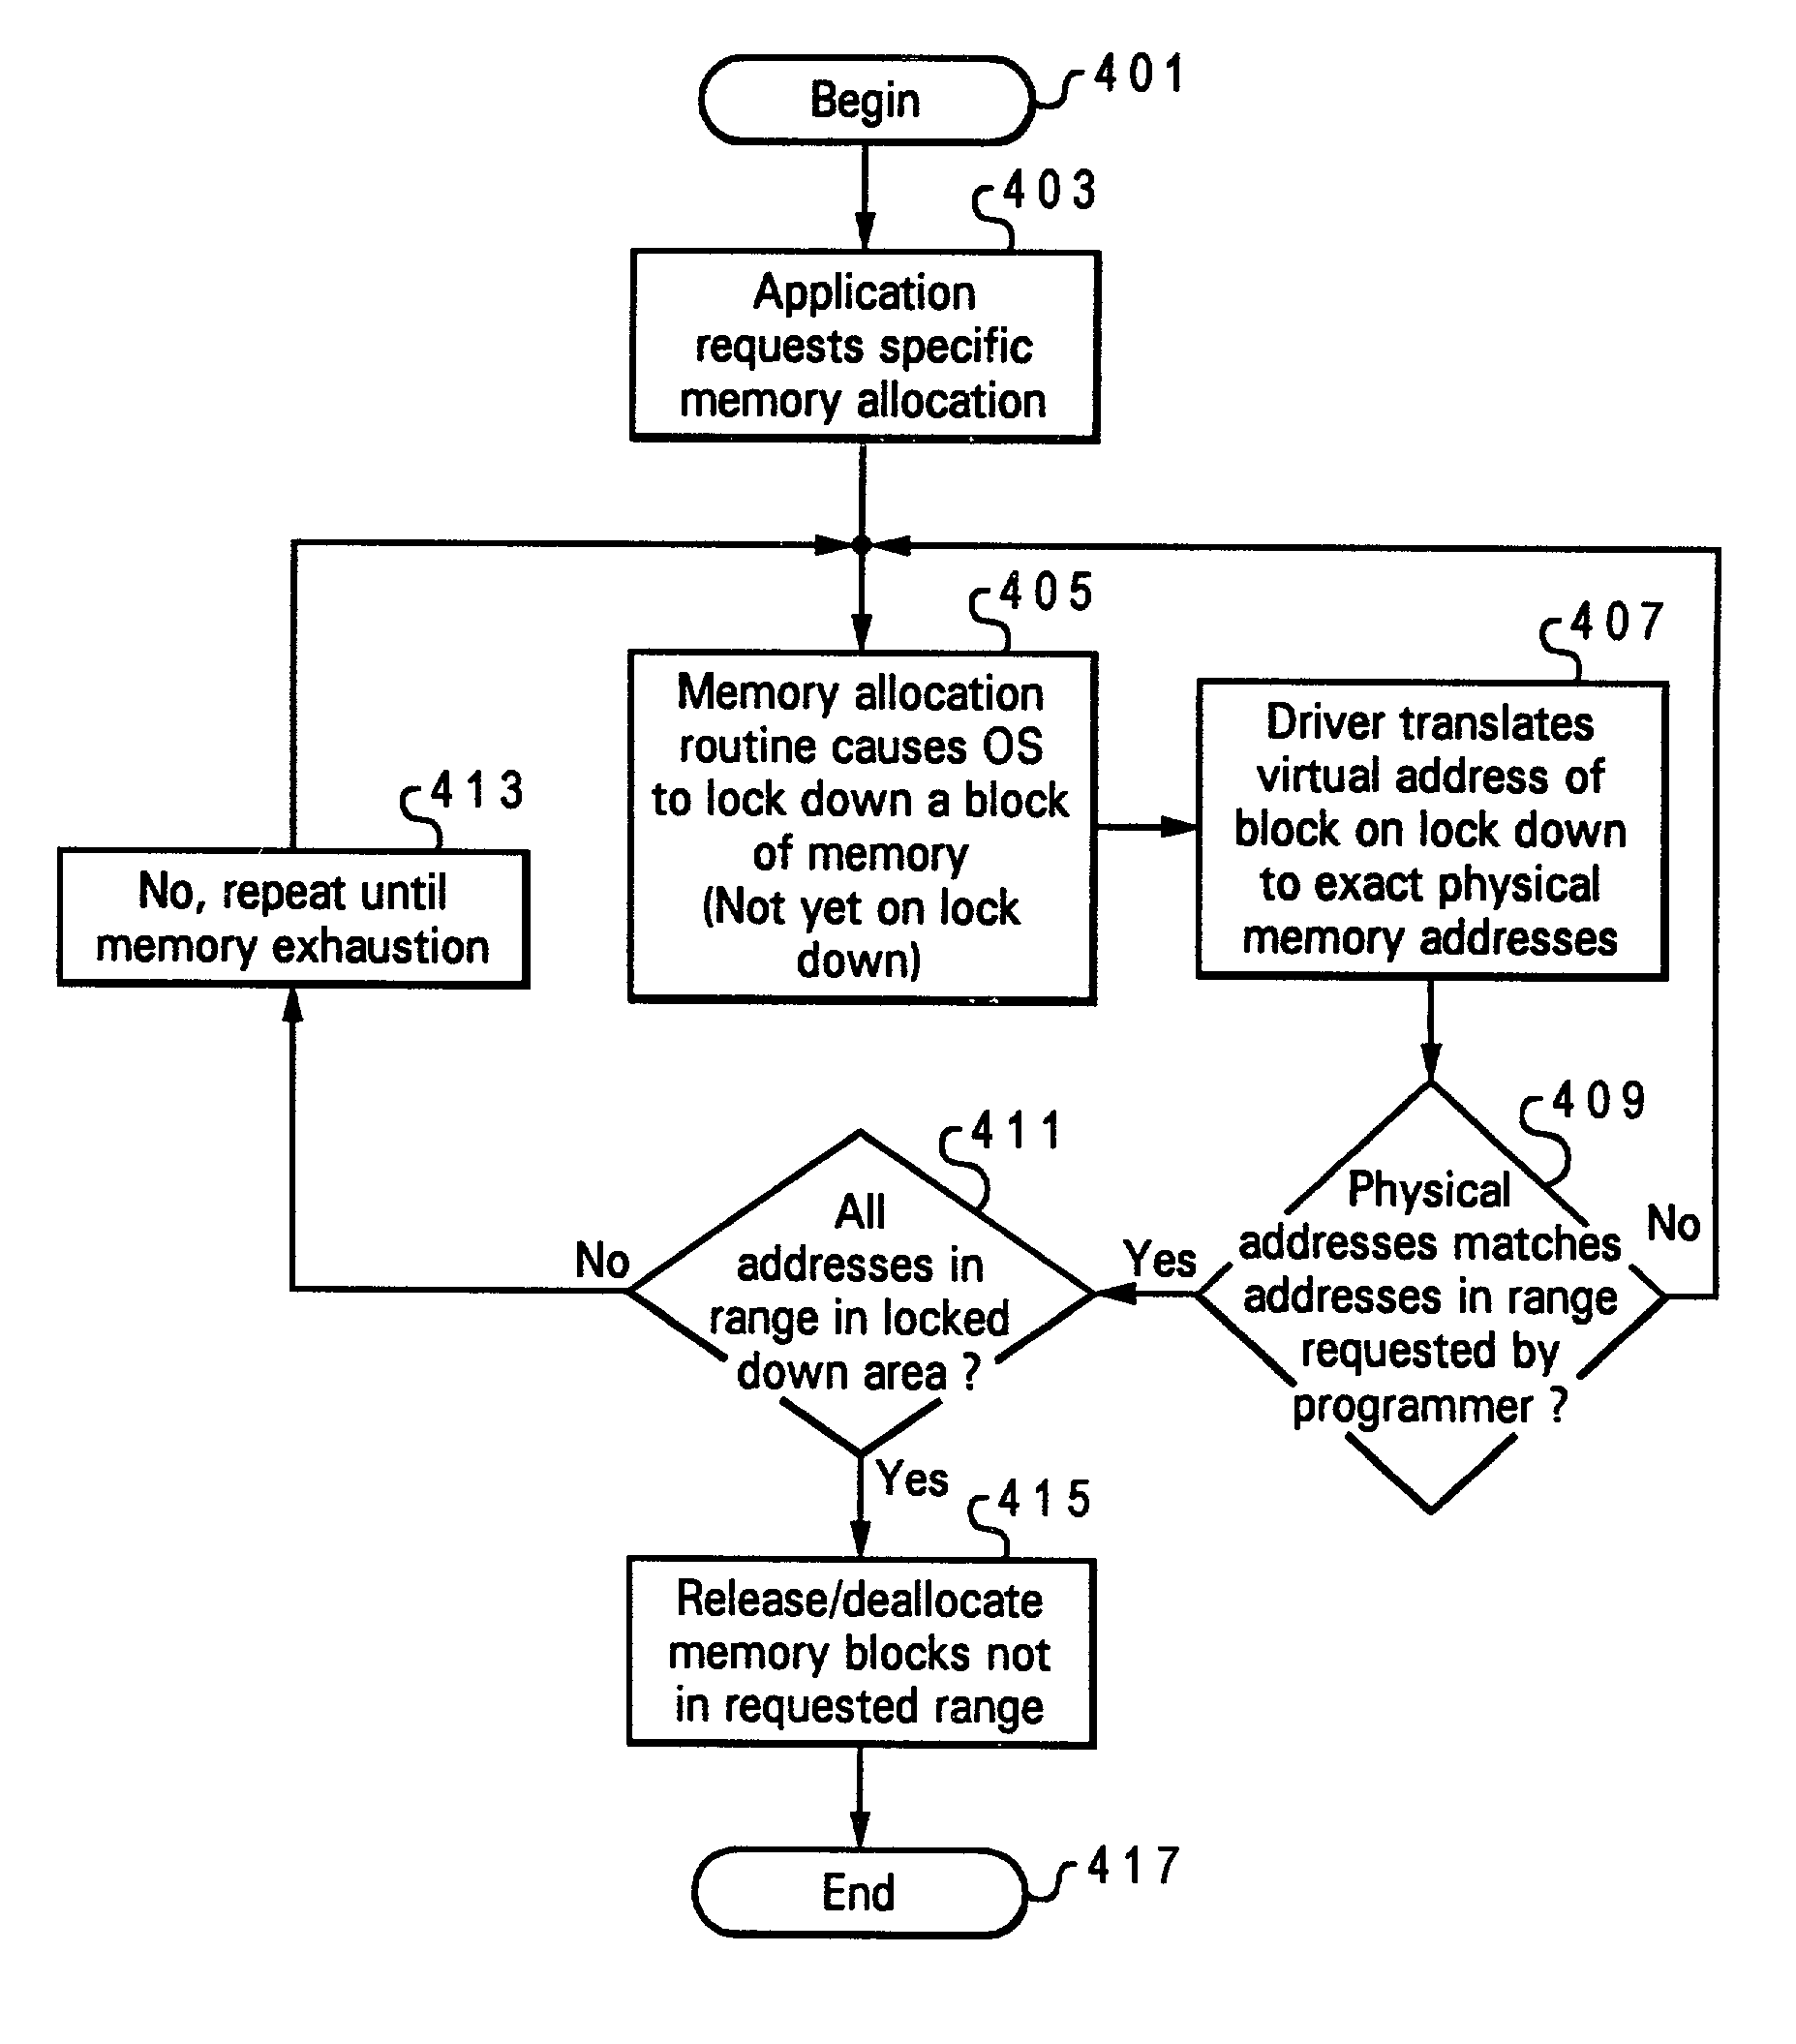 Programmatically pre-selecting specific physical memory blocks to allocate to an executing application